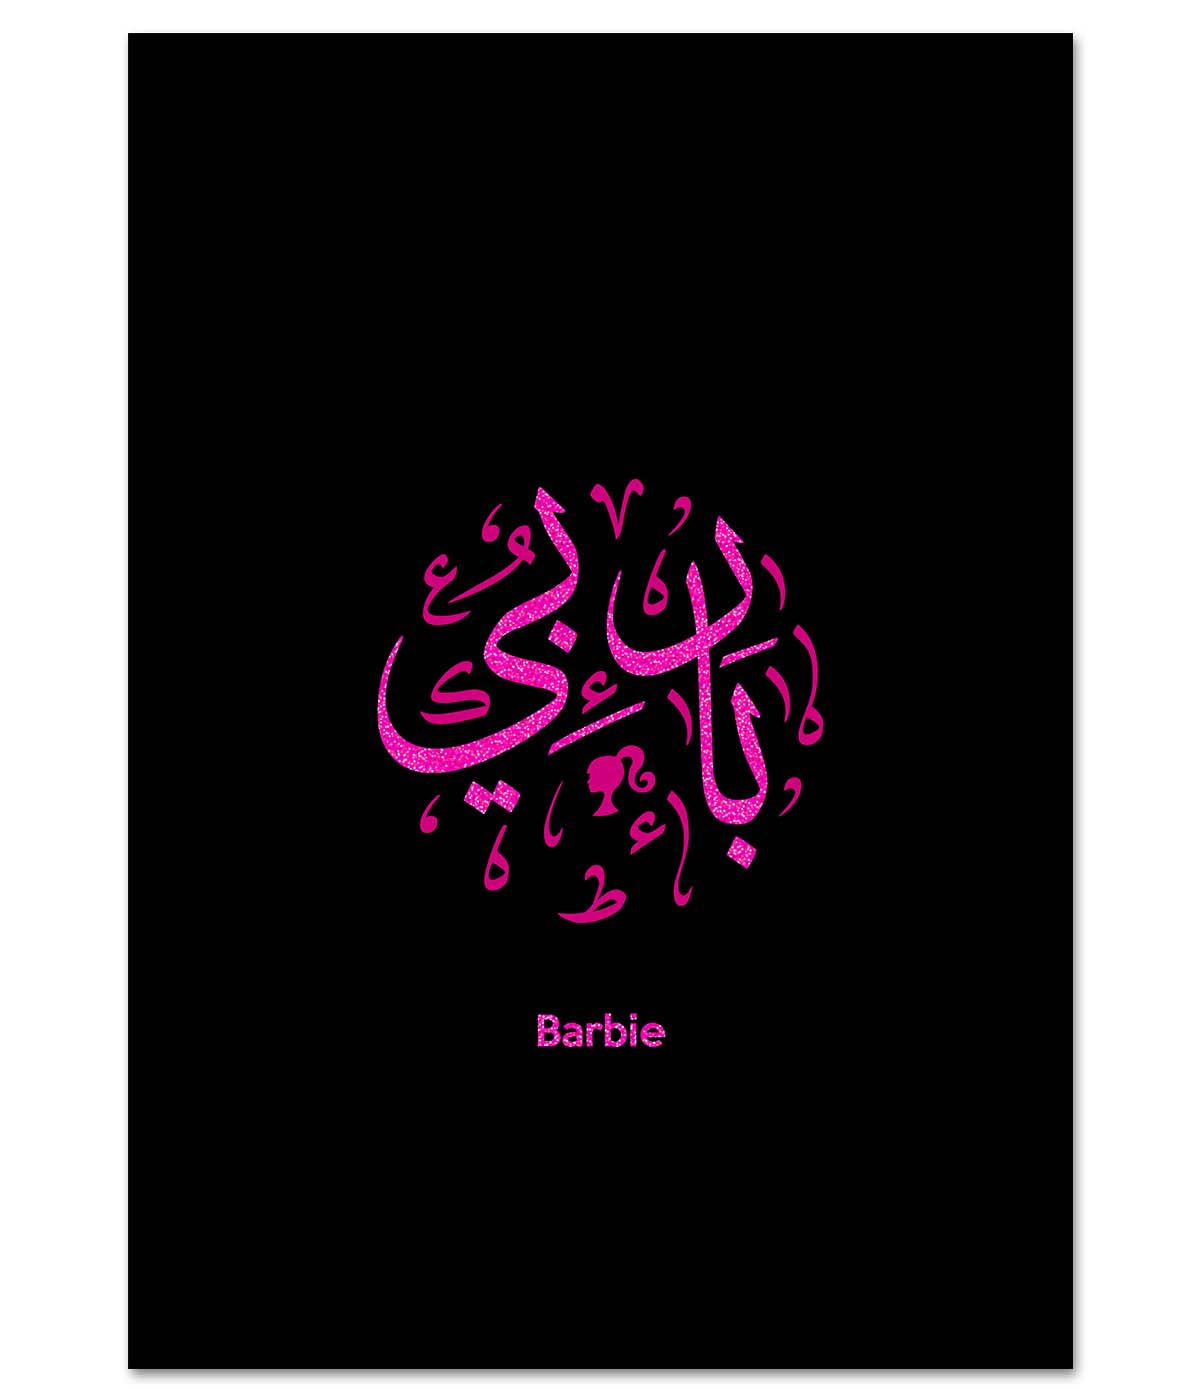 Barbie in Calligraphy